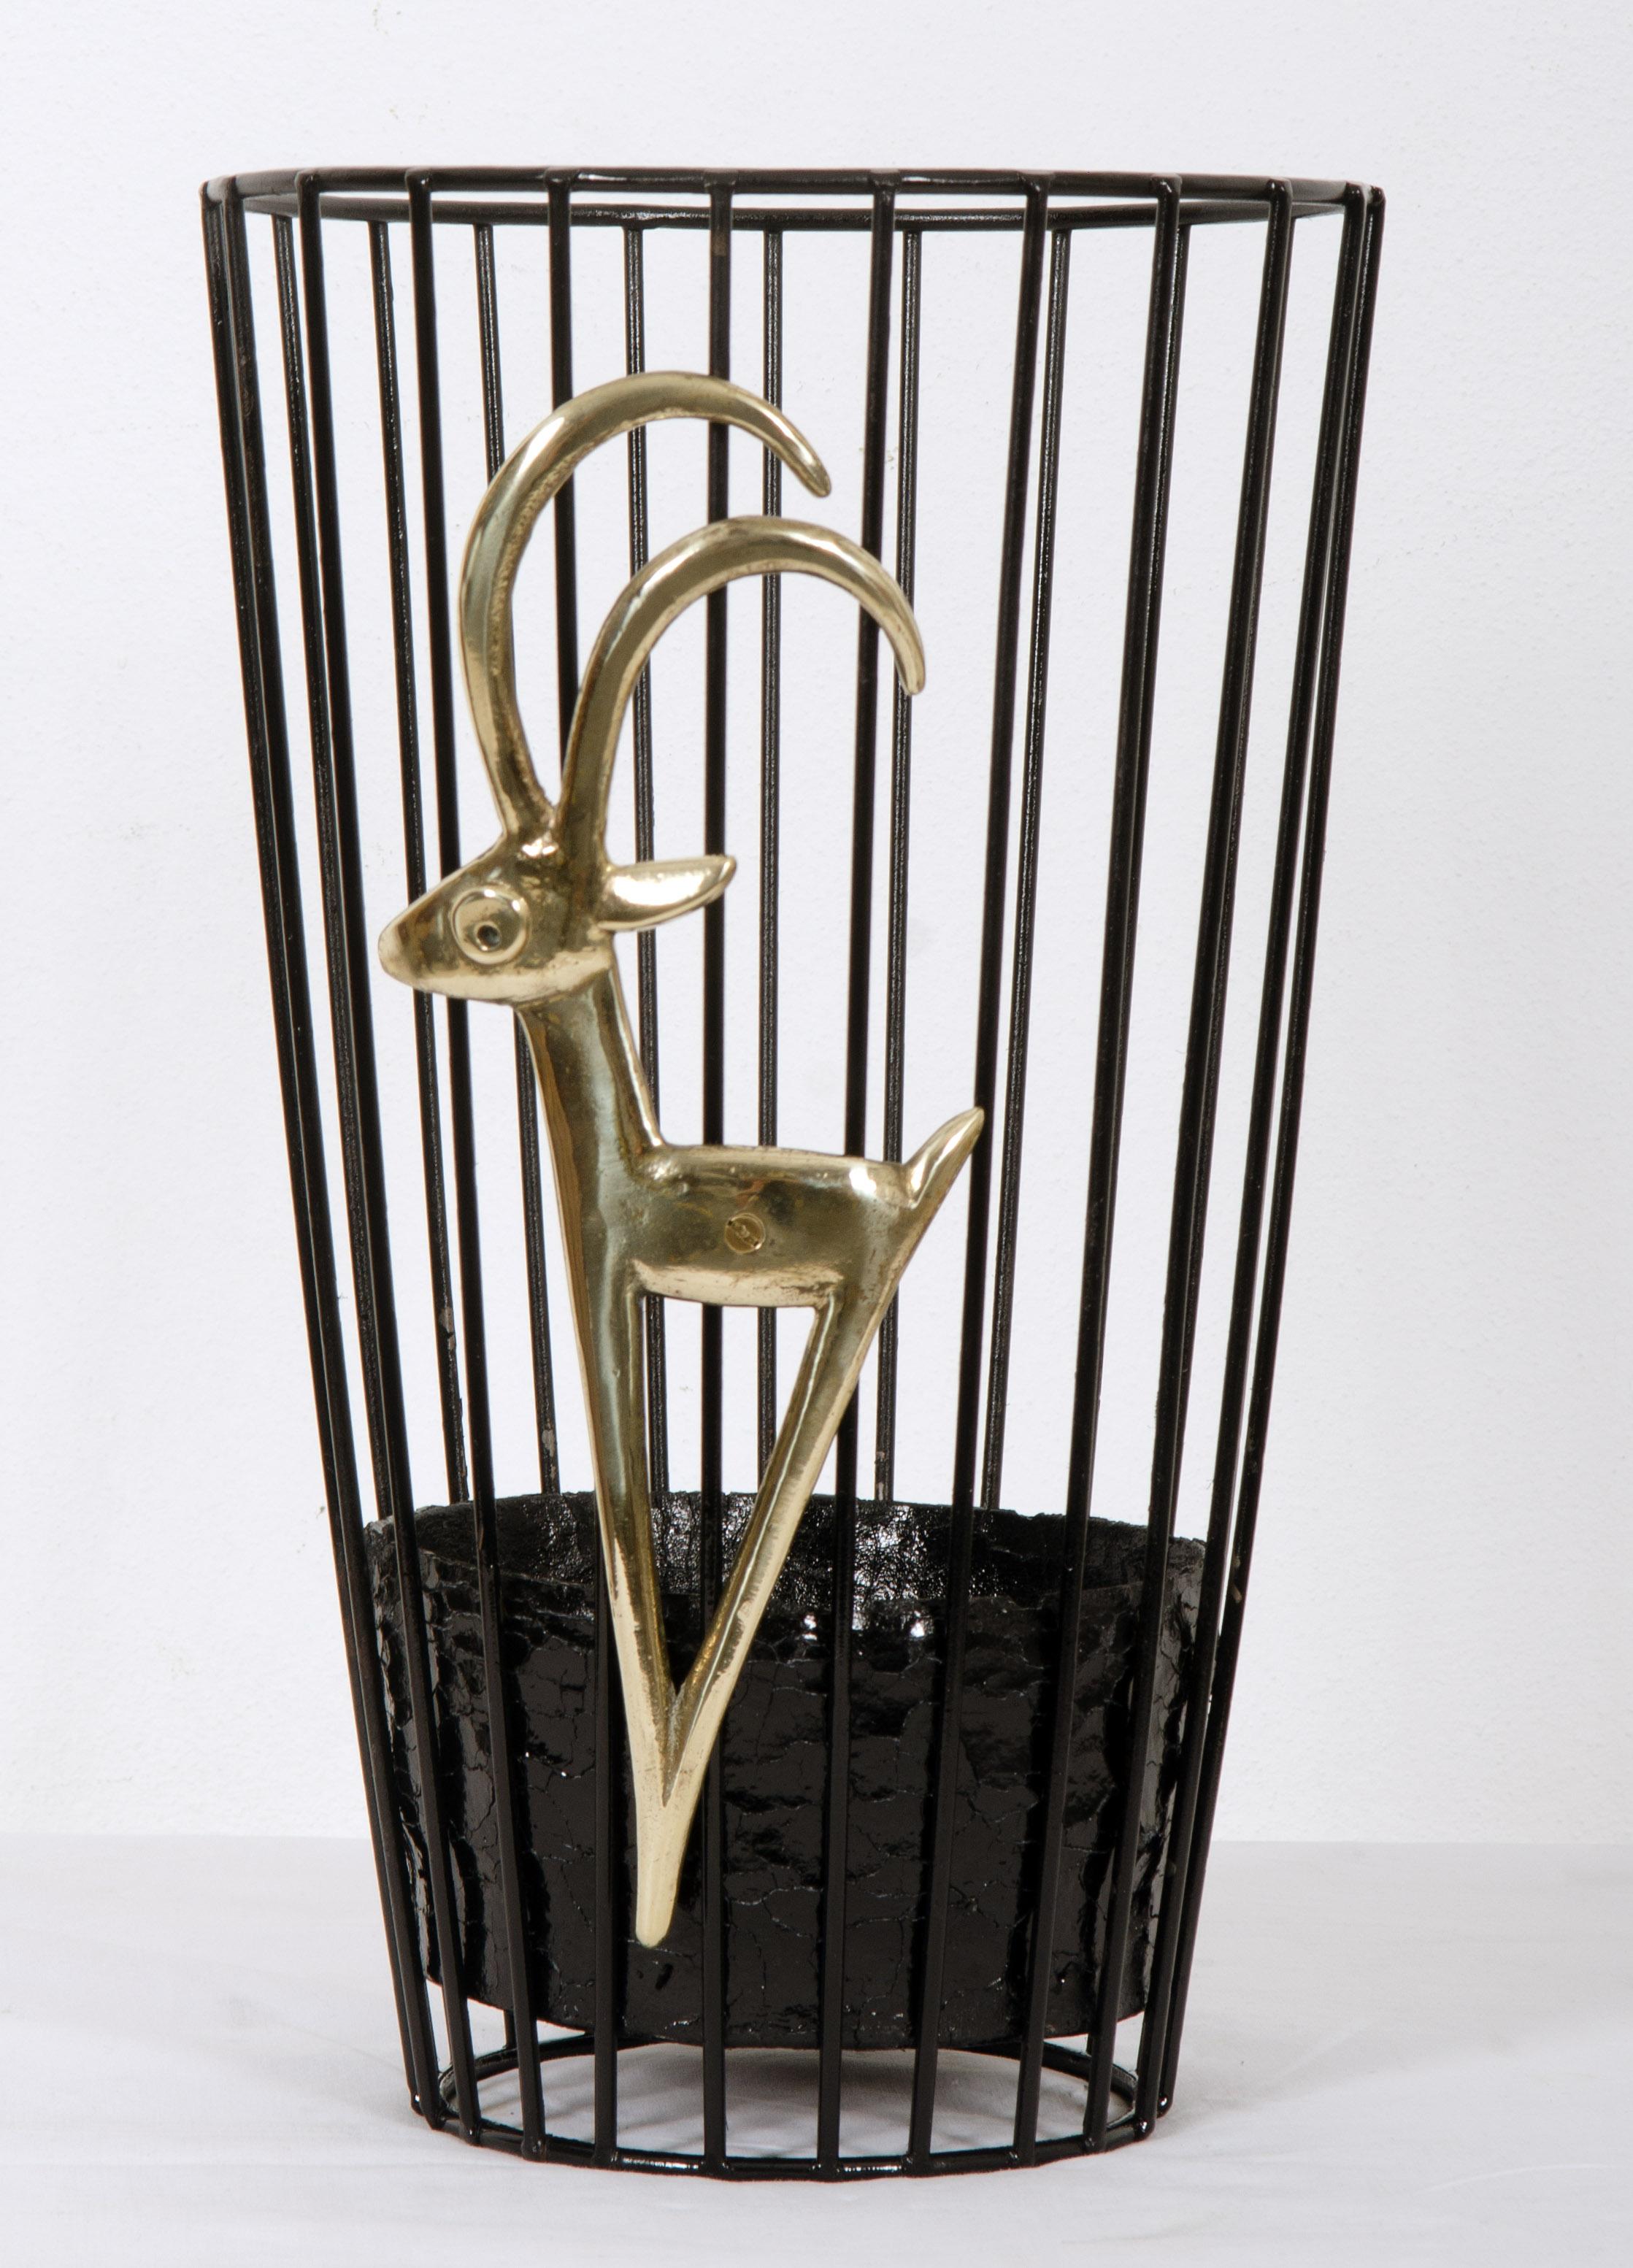 Steel basket with lead casting drip tray black painted with a brass capricorn outside the basket, designed by Walter Bosse in the 1950s for Hertha Baller. 
  